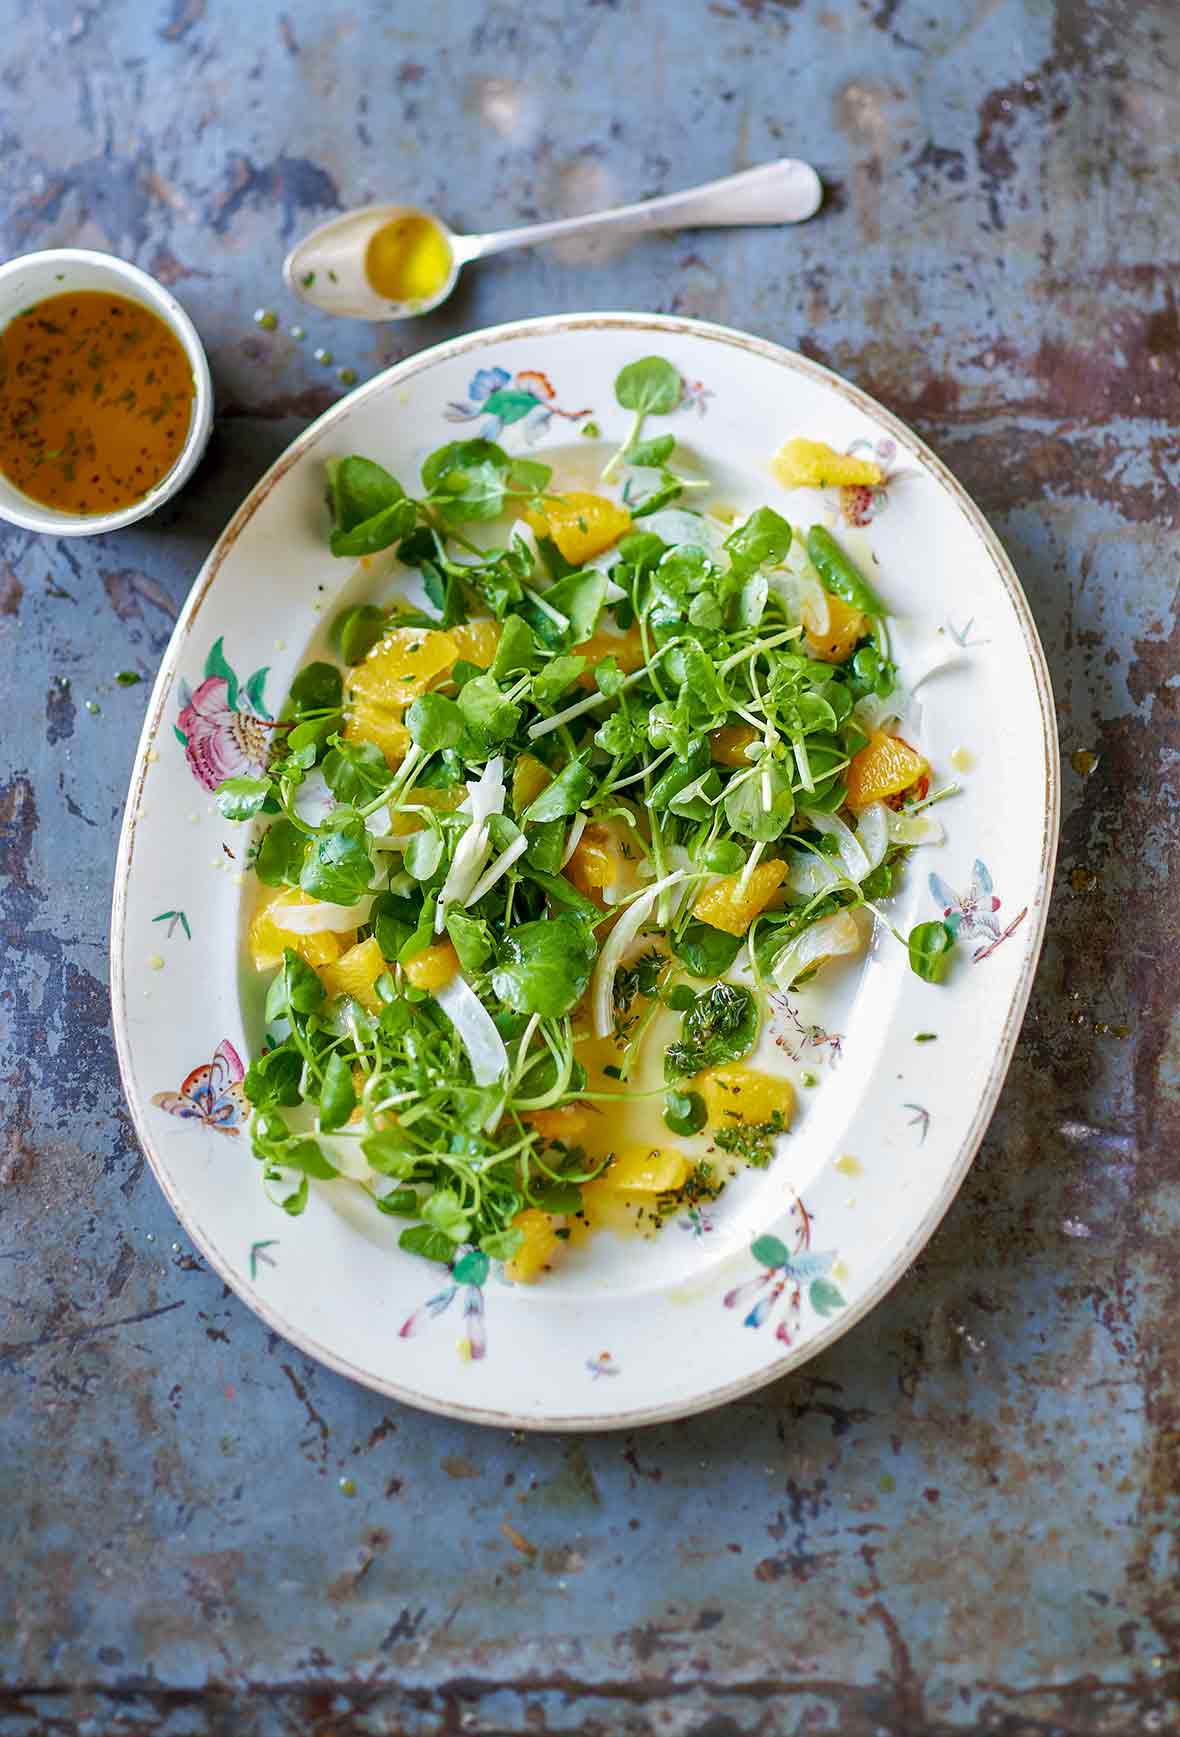 Plate of fennel, orange, and watercress salad on a metal sheet with dressing and a spoon on the side